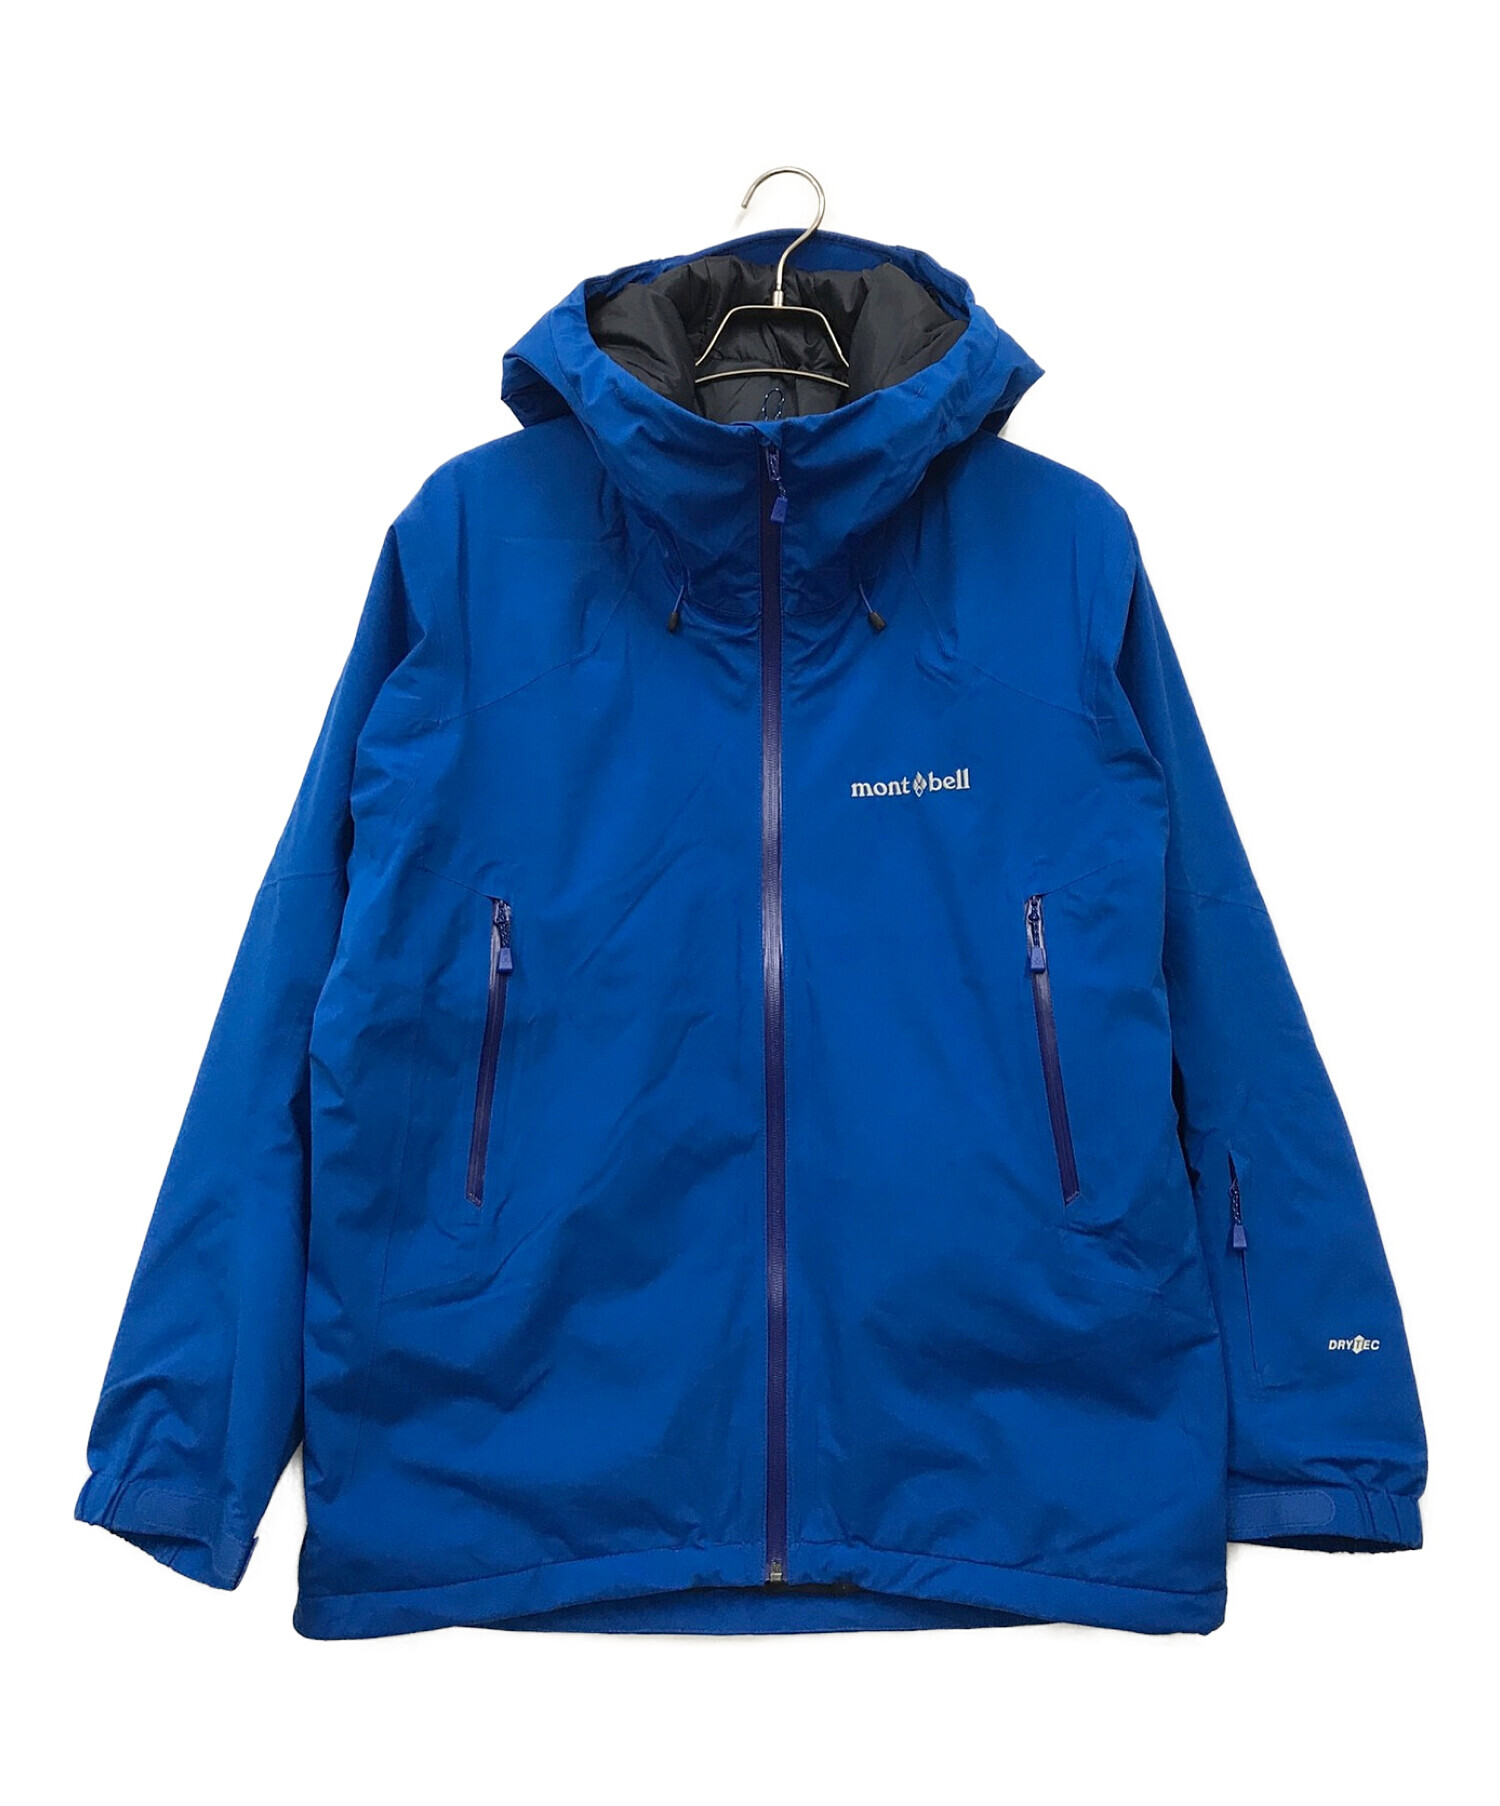 New Arrival mont-bellパウダーステップパーカーメンズ用 - スノーボード